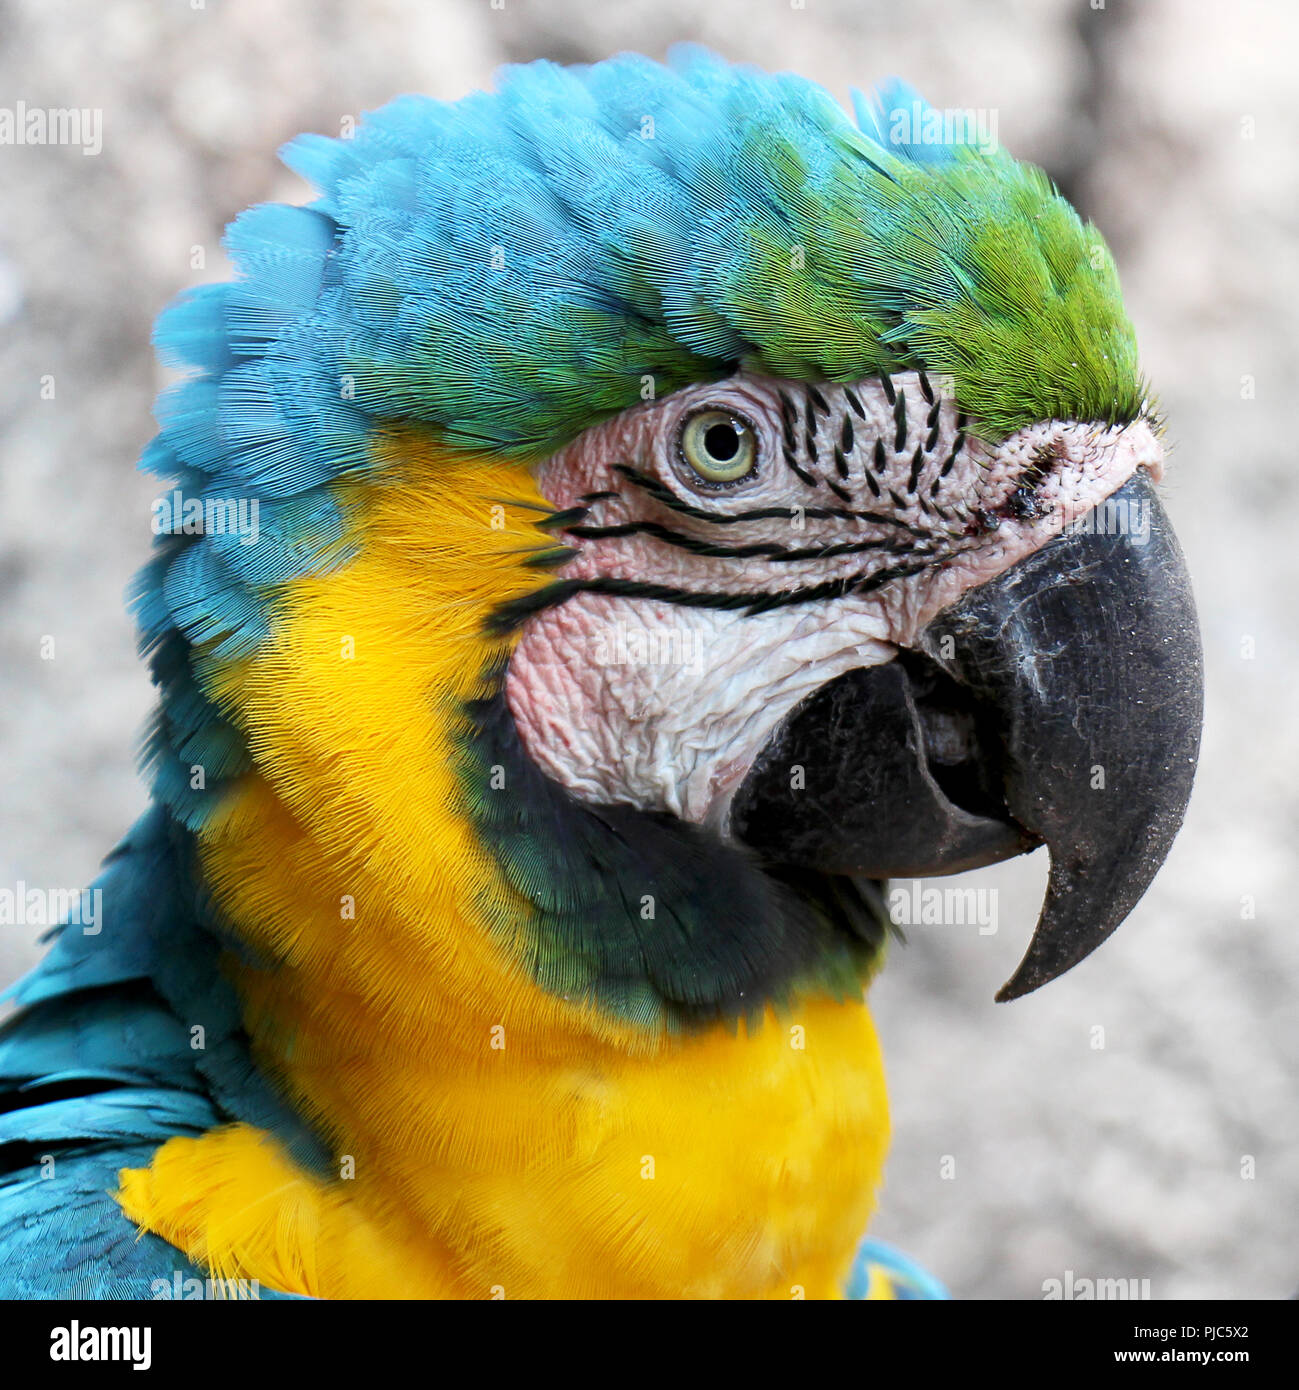 Head detail of blue-and-gold macaw parrot (Ara ararauna). Stock Photo